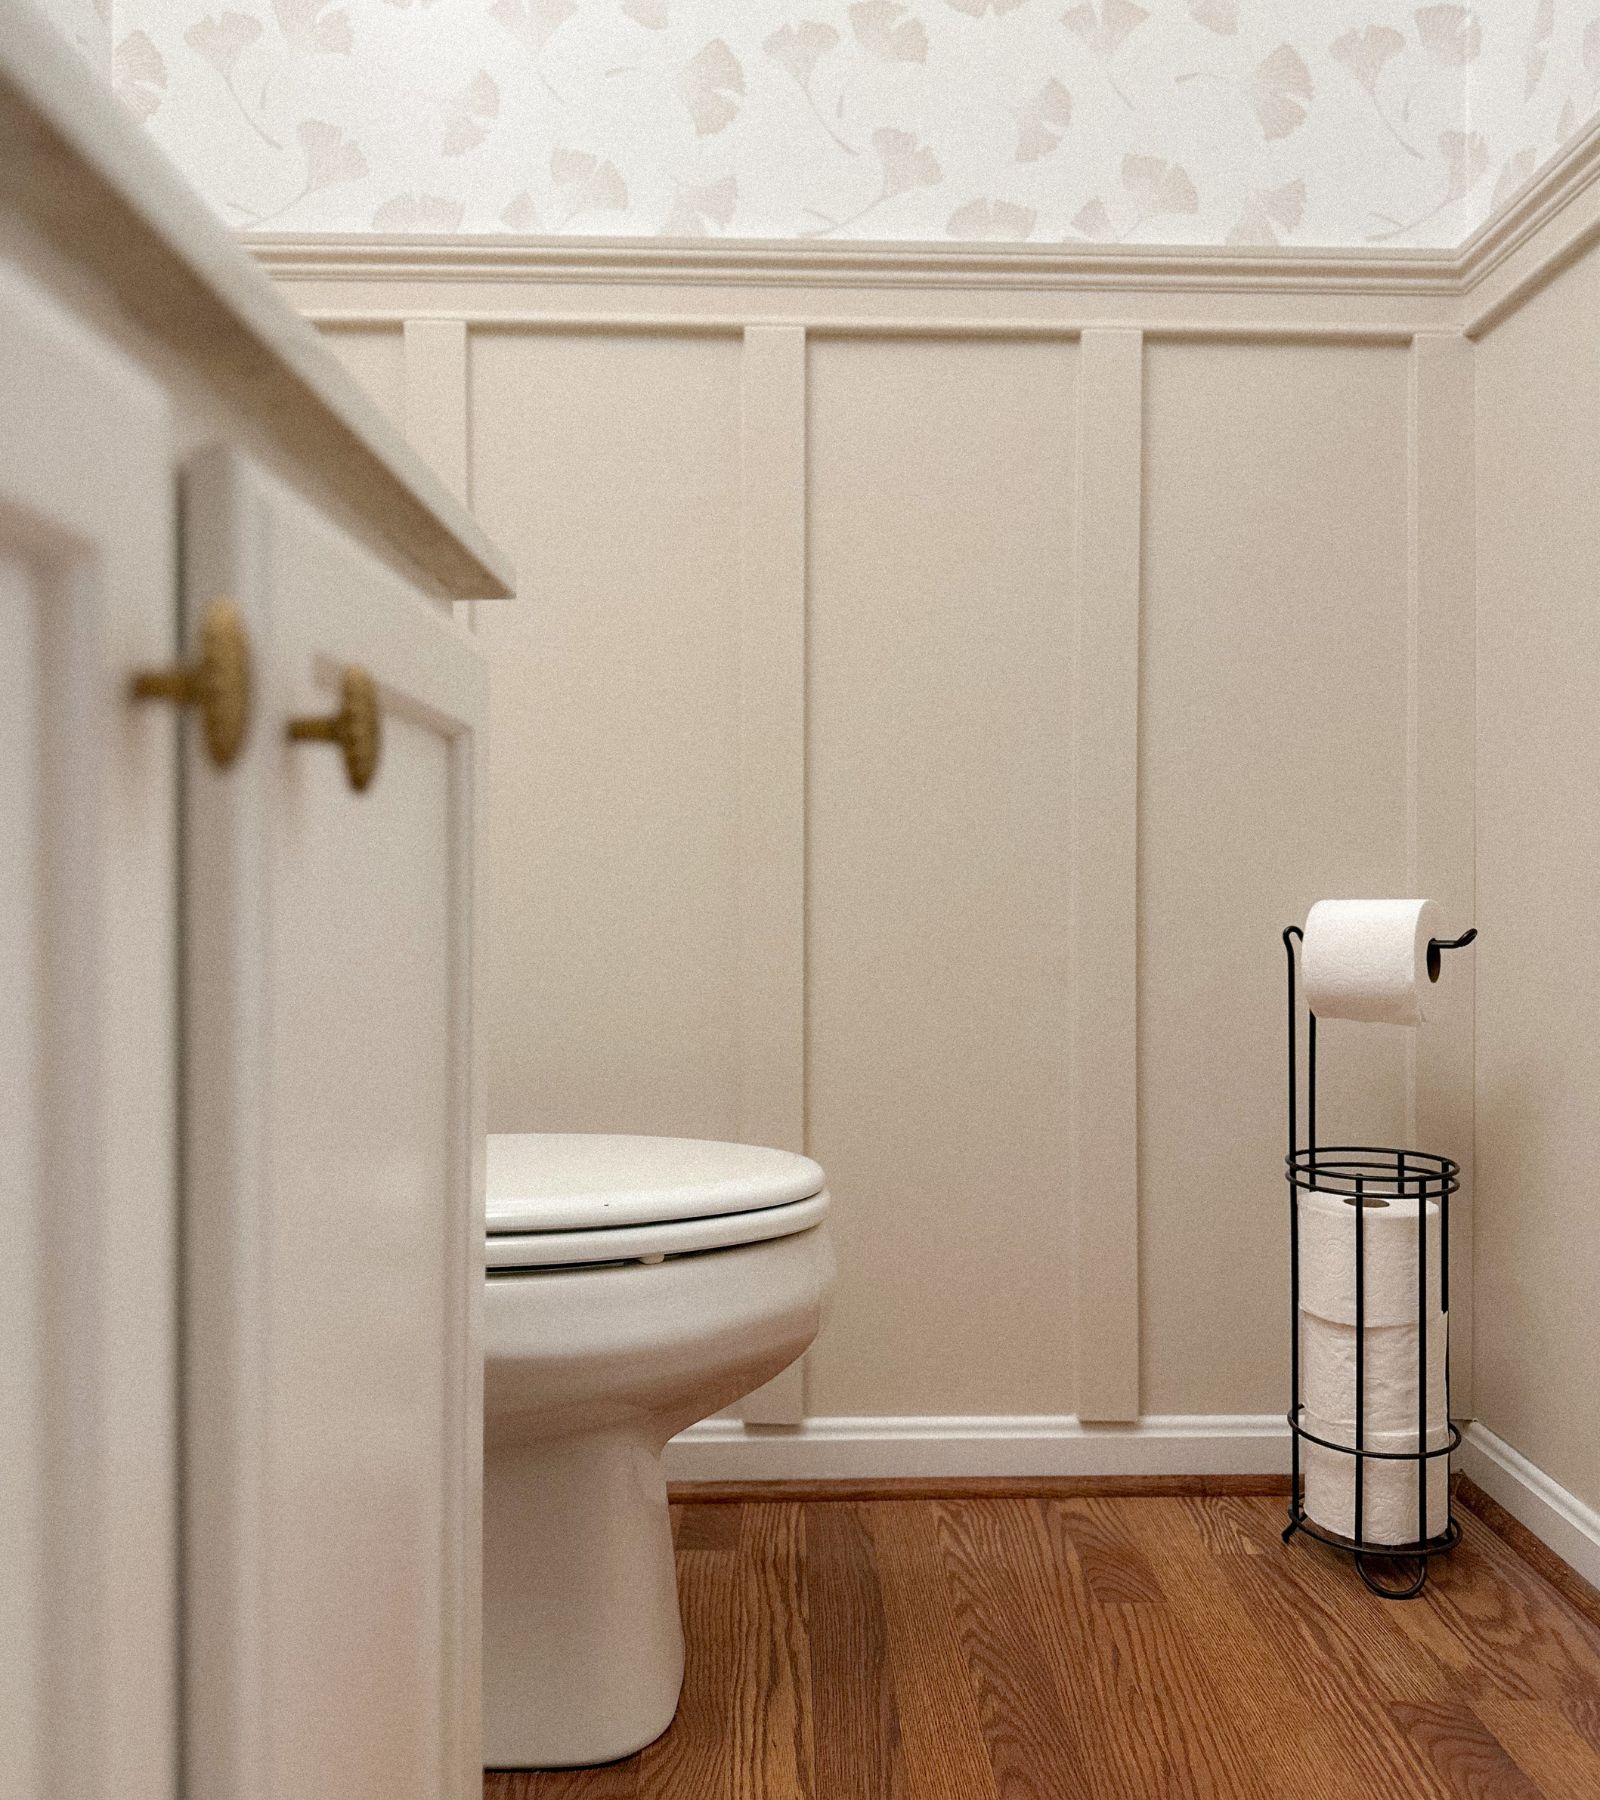 https://homebyalley.com/wp-content/uploads/2023/01/Where-To-Put-Toilet-Paper-Holder-In-Small-Bathroom-Featured-Image.jpg